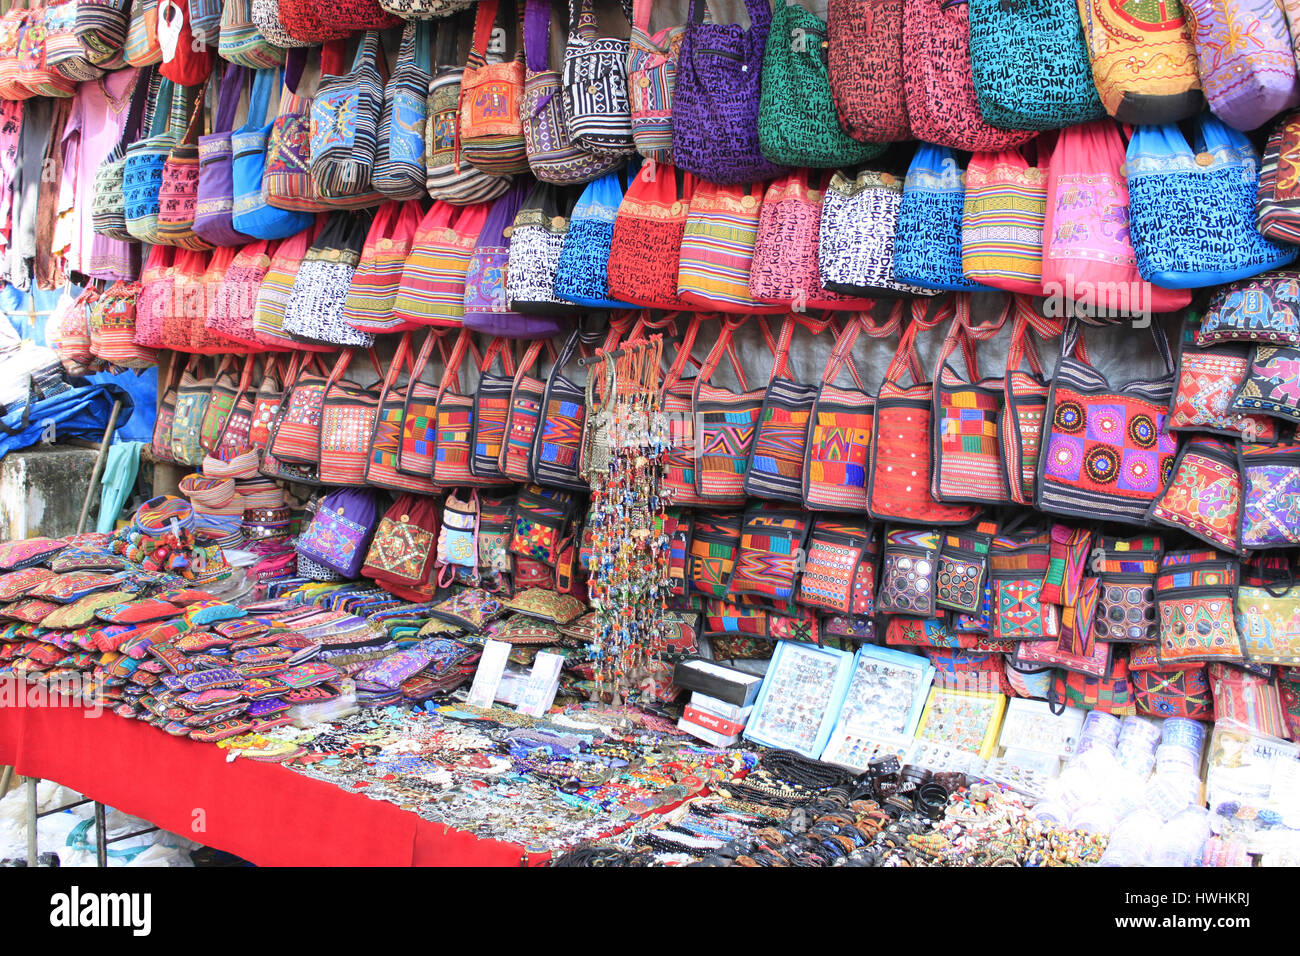 Colorful bags and trinkets on display in a shop. Goa, India Stock Photo